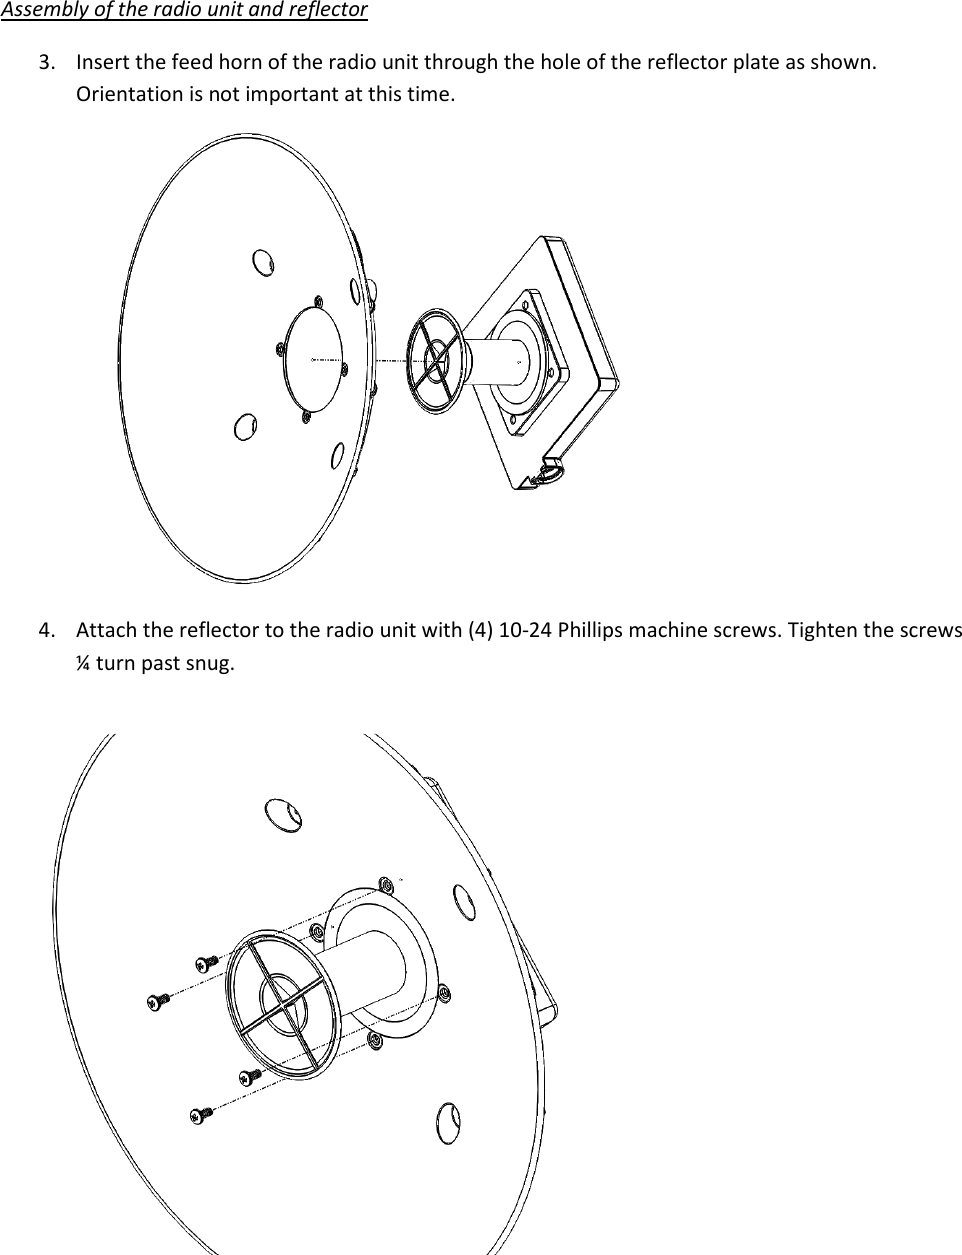 Assembly of the radio unit and reflector 3. Insert the feed horn of the radio unit through the hole of the reflector plate as shown. Orientation is not important at this time.  4. Attach the reflector to the radio unit with (4) 10-24 Phillips machine screws. Tighten the screws ¼ turn past snug.       